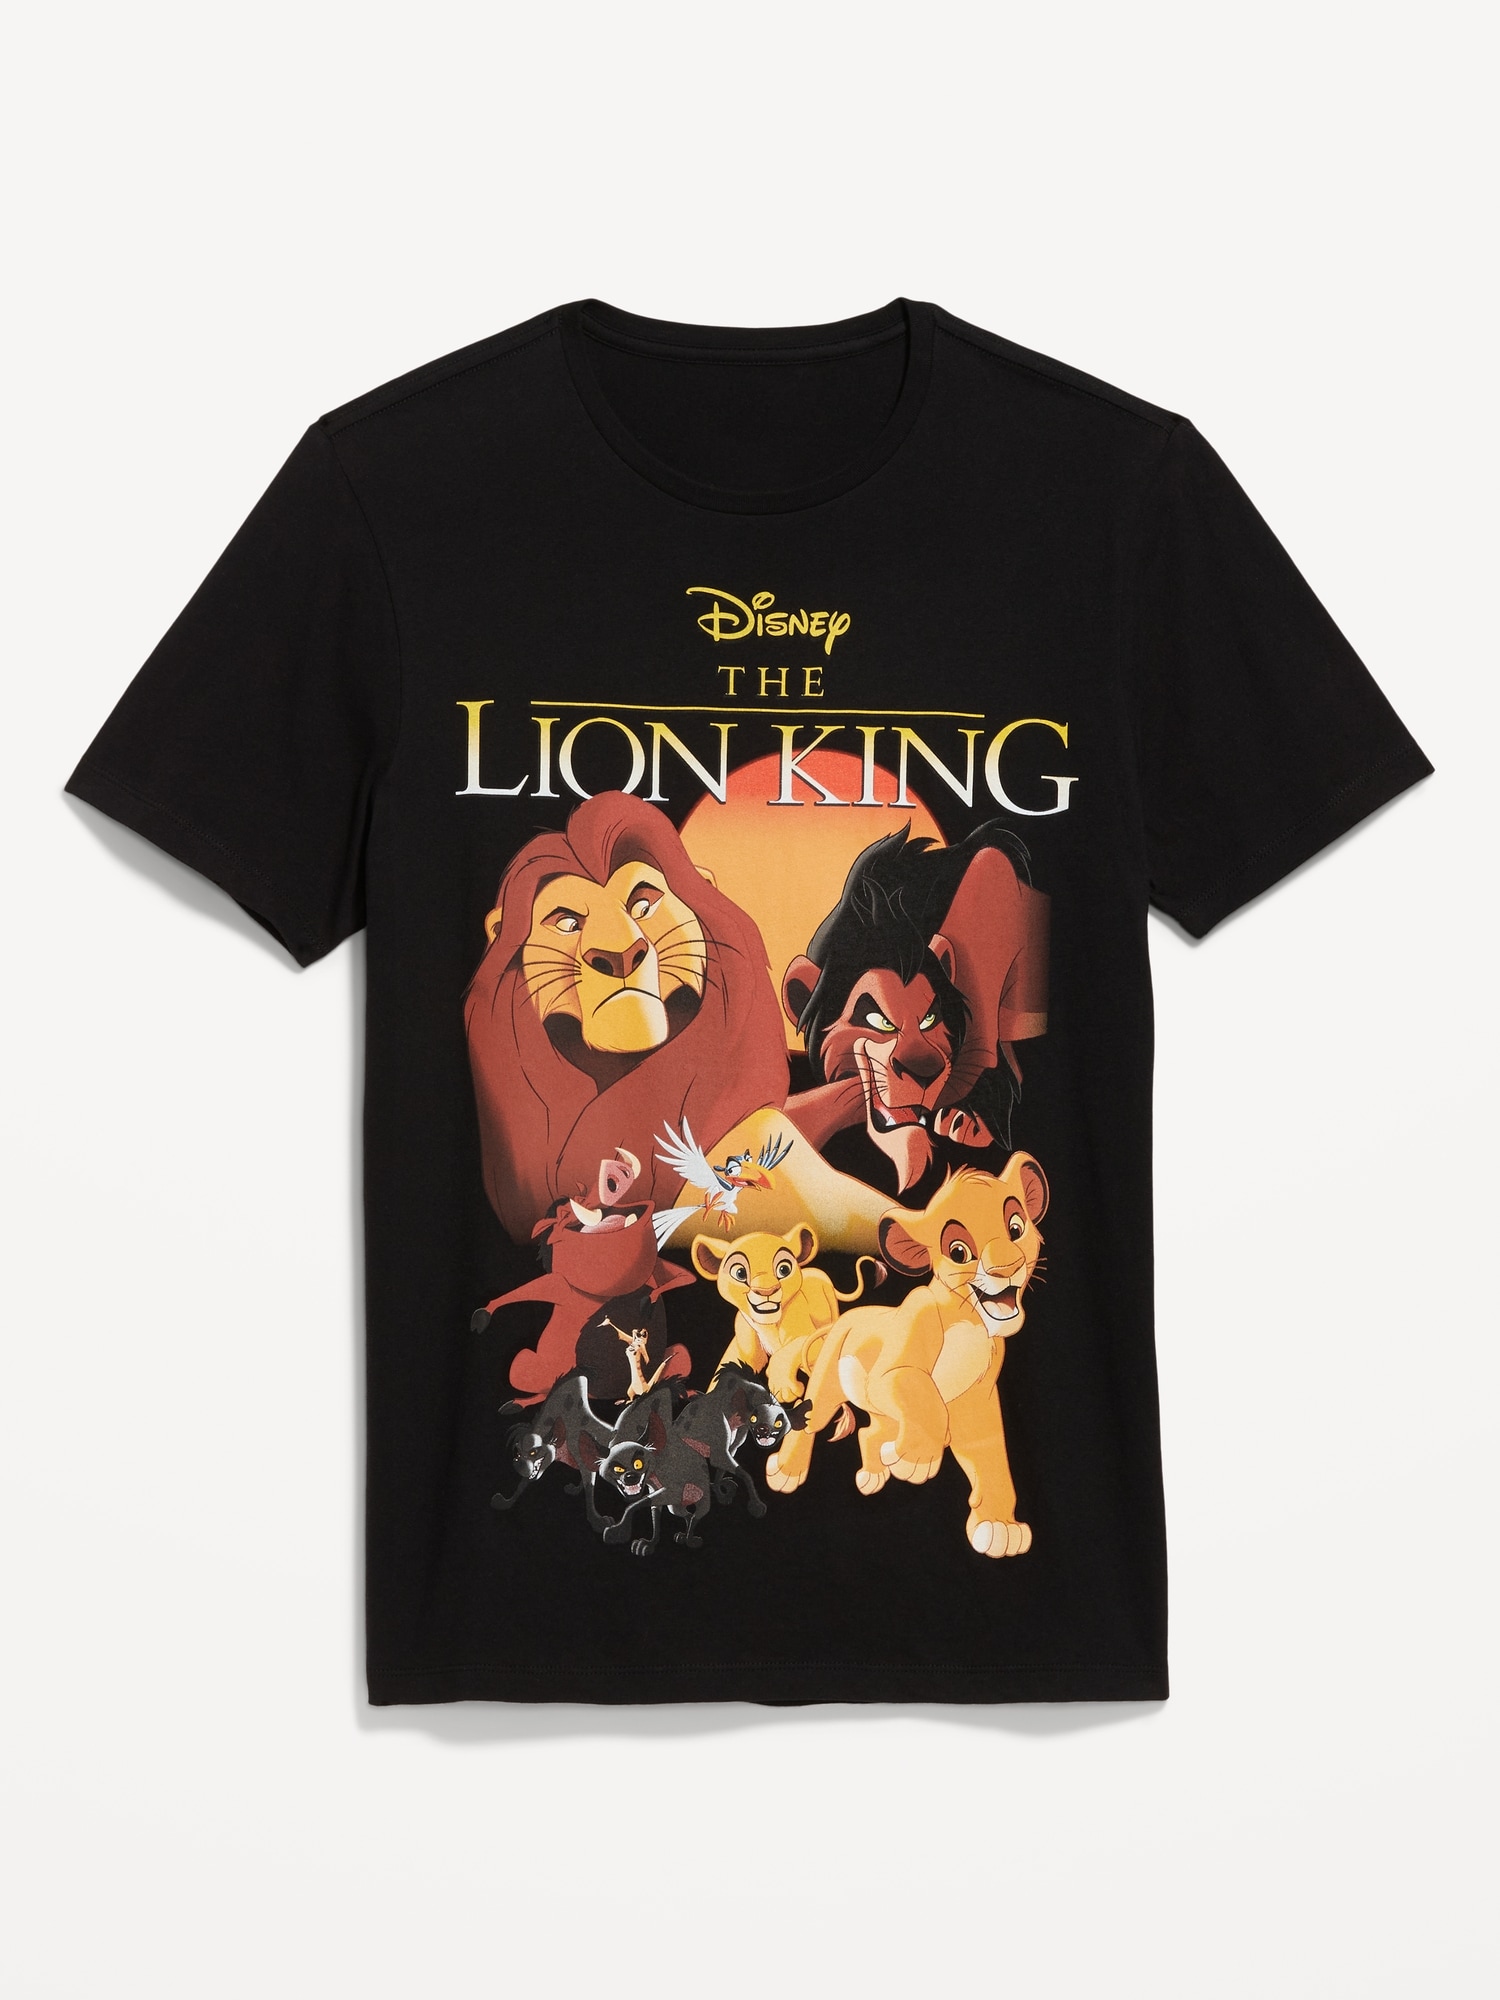 Disney© The Lion King Gender-Neutral T-Shirt for Adults